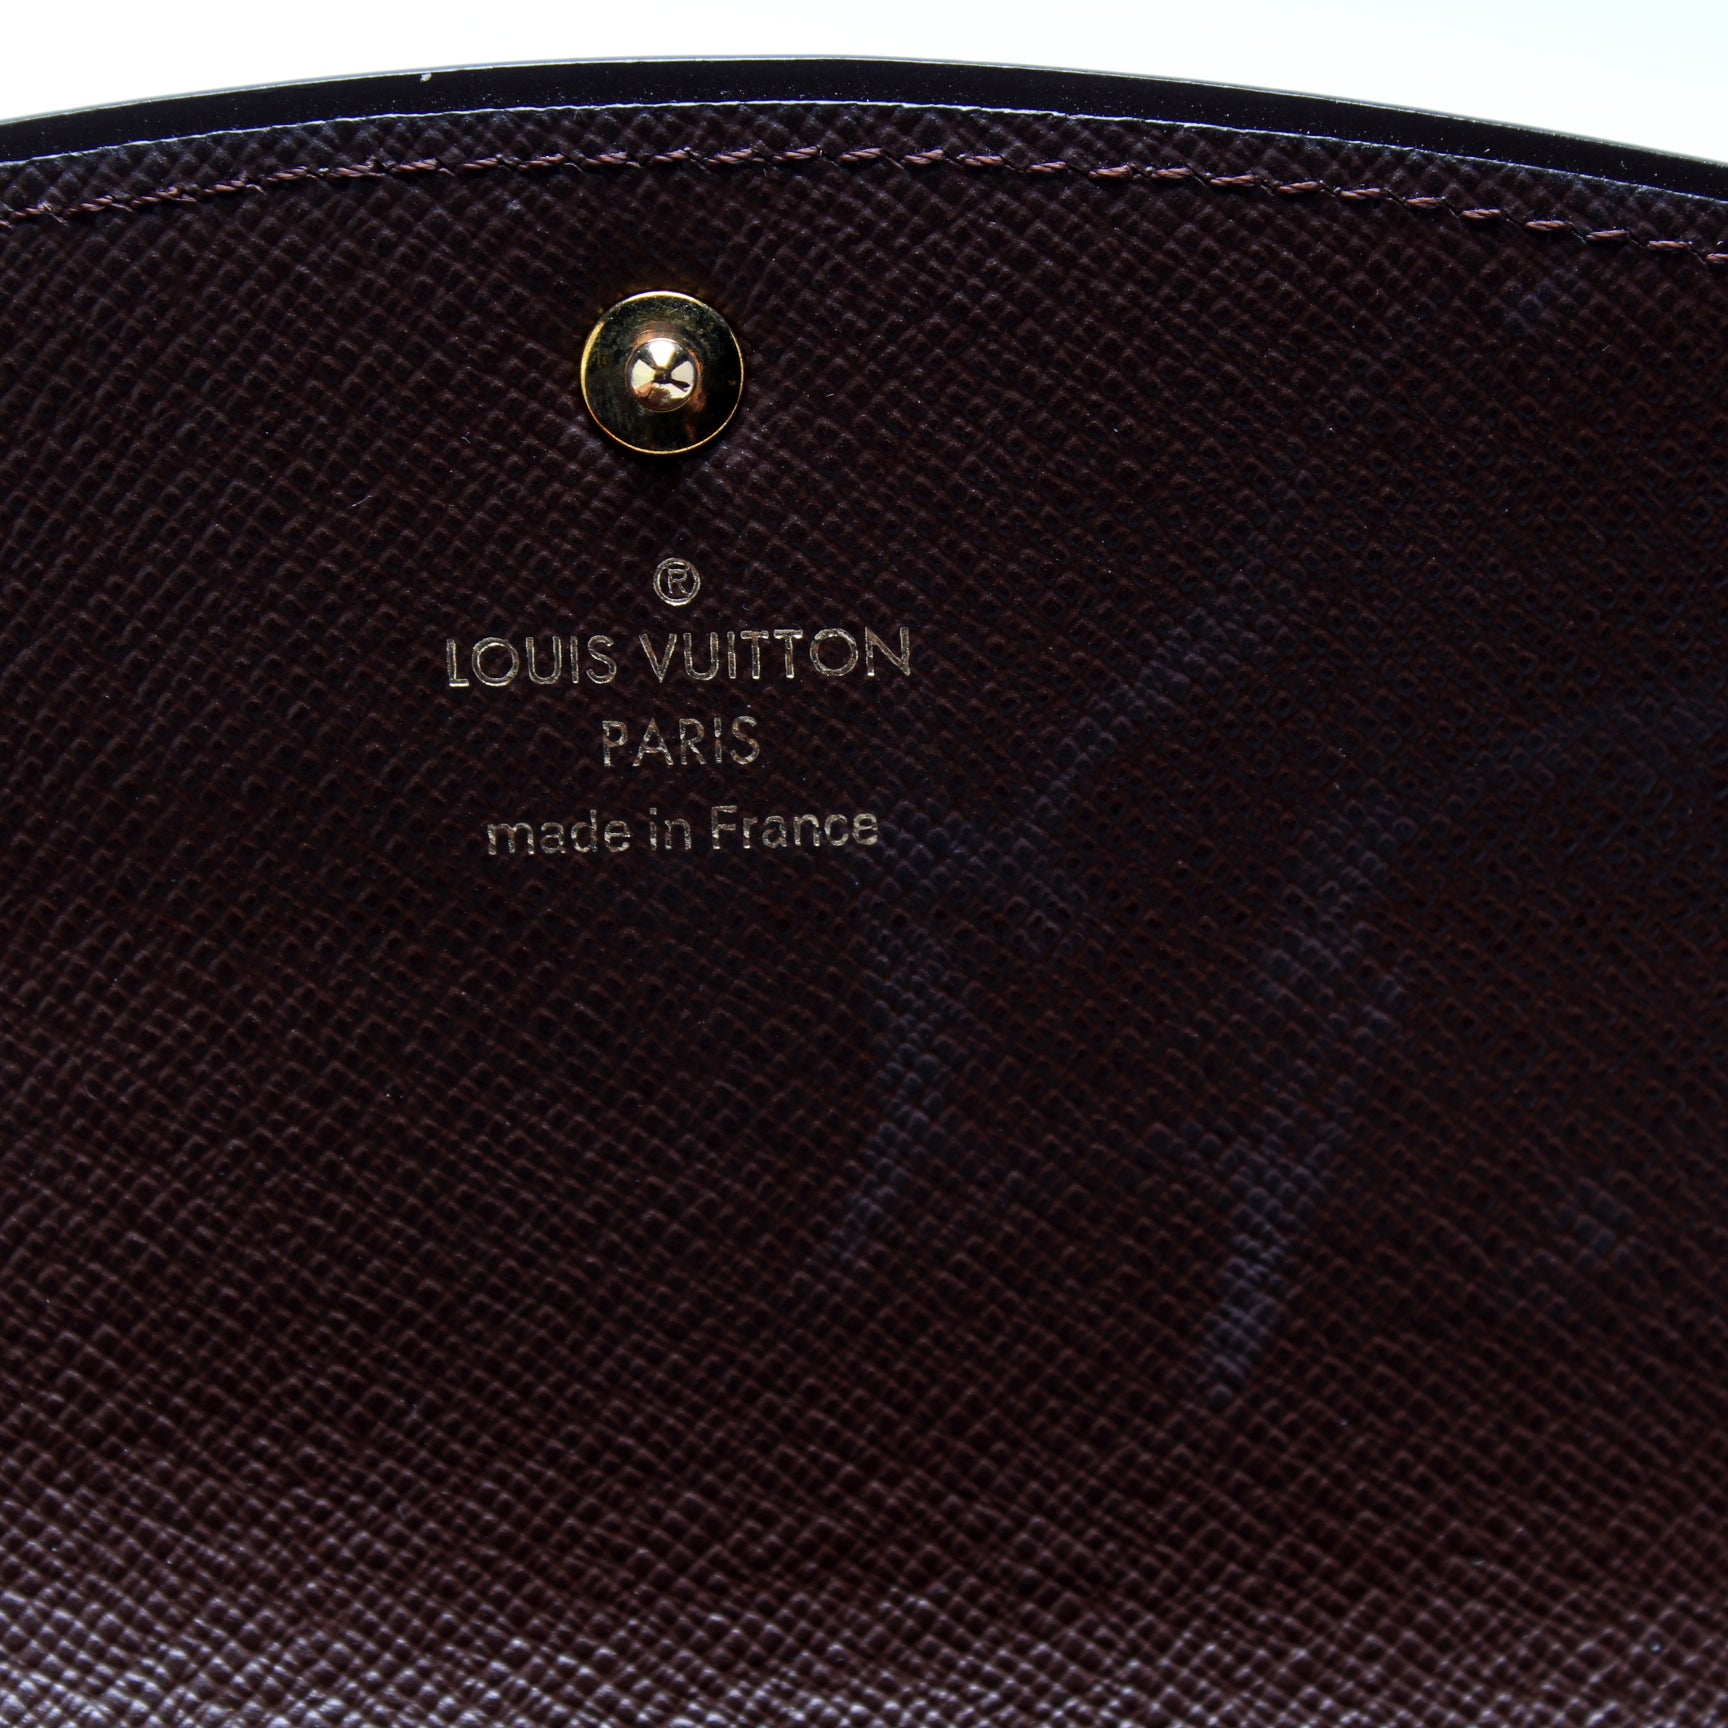 Louis Vuitton - Authenticated Normandy Wallet - Leather Black For Woman, Very Good condition